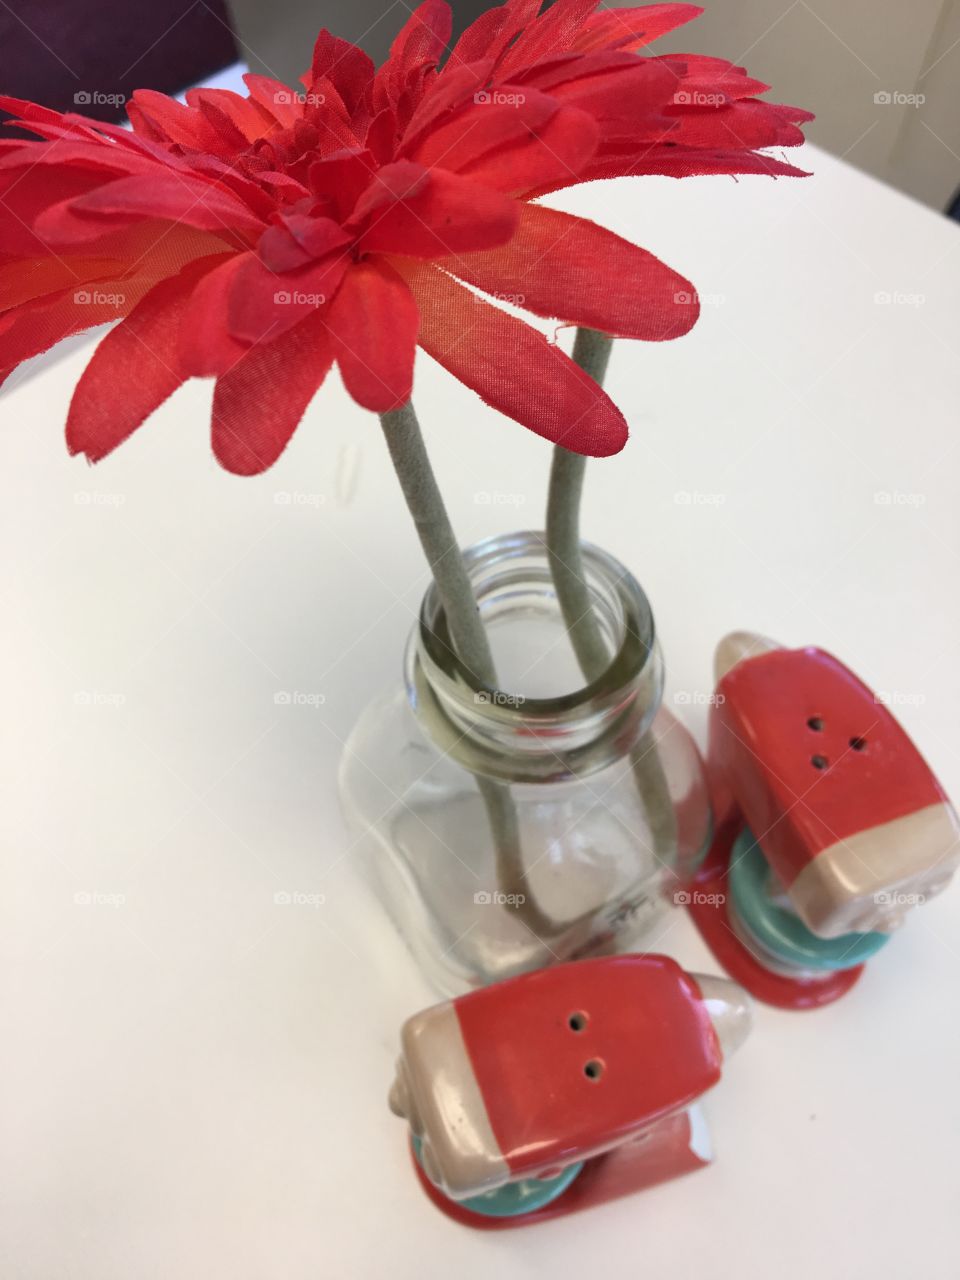 Flower next to Salt and Pepper Shakers